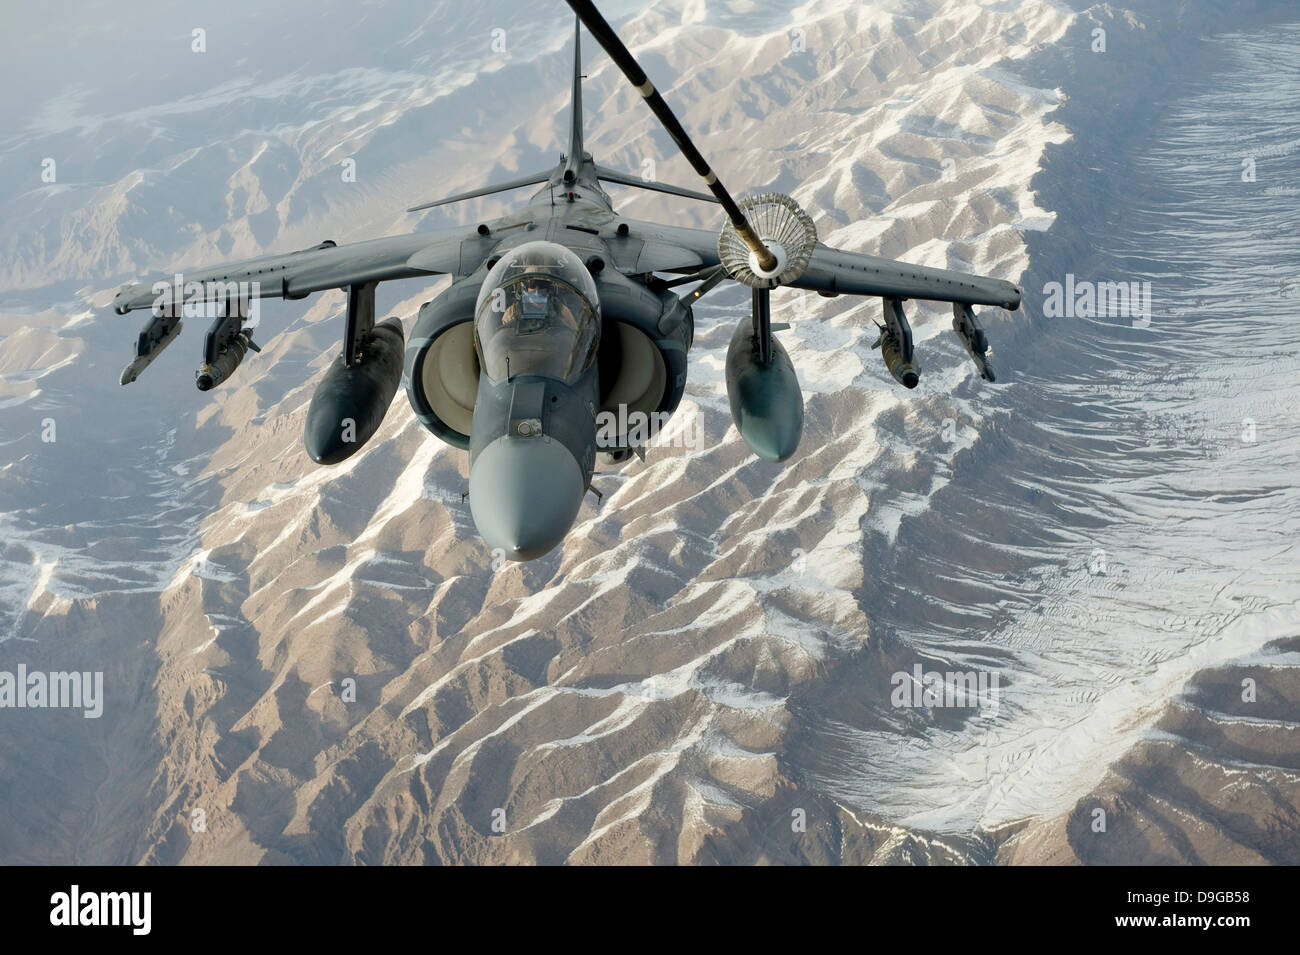 February 24, 2012 - A U.S. Marine Corps A/V-8B Harrier receives fuel over Afghanistan from a KC-10 Extender. Stock Photo